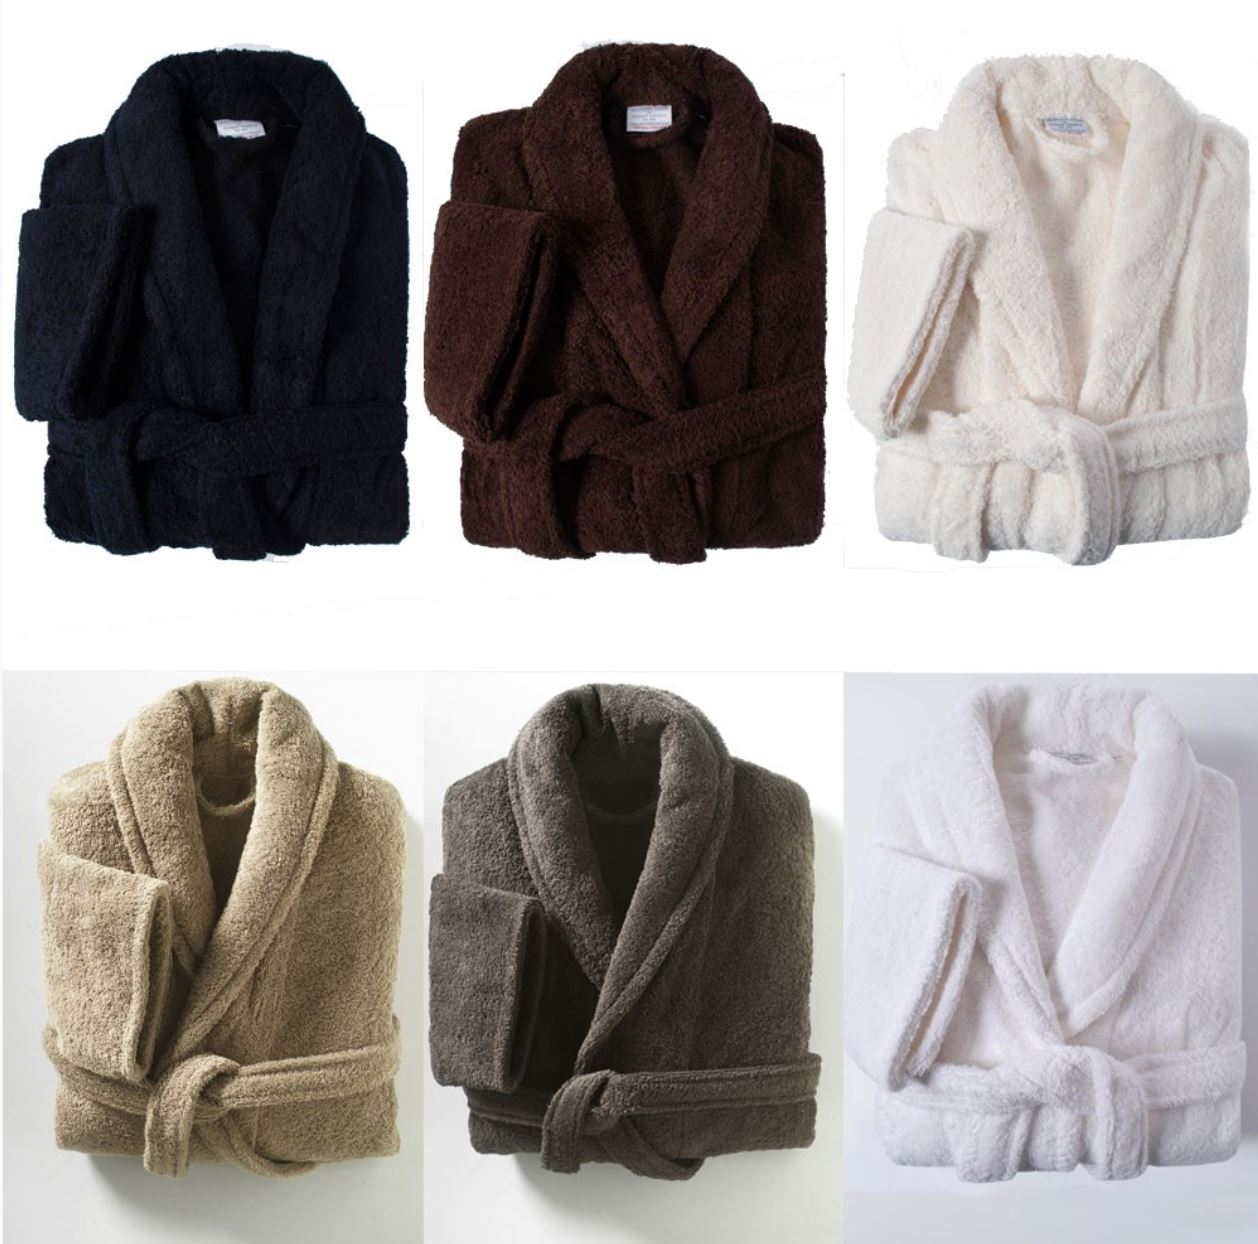 6 colours of bath robes